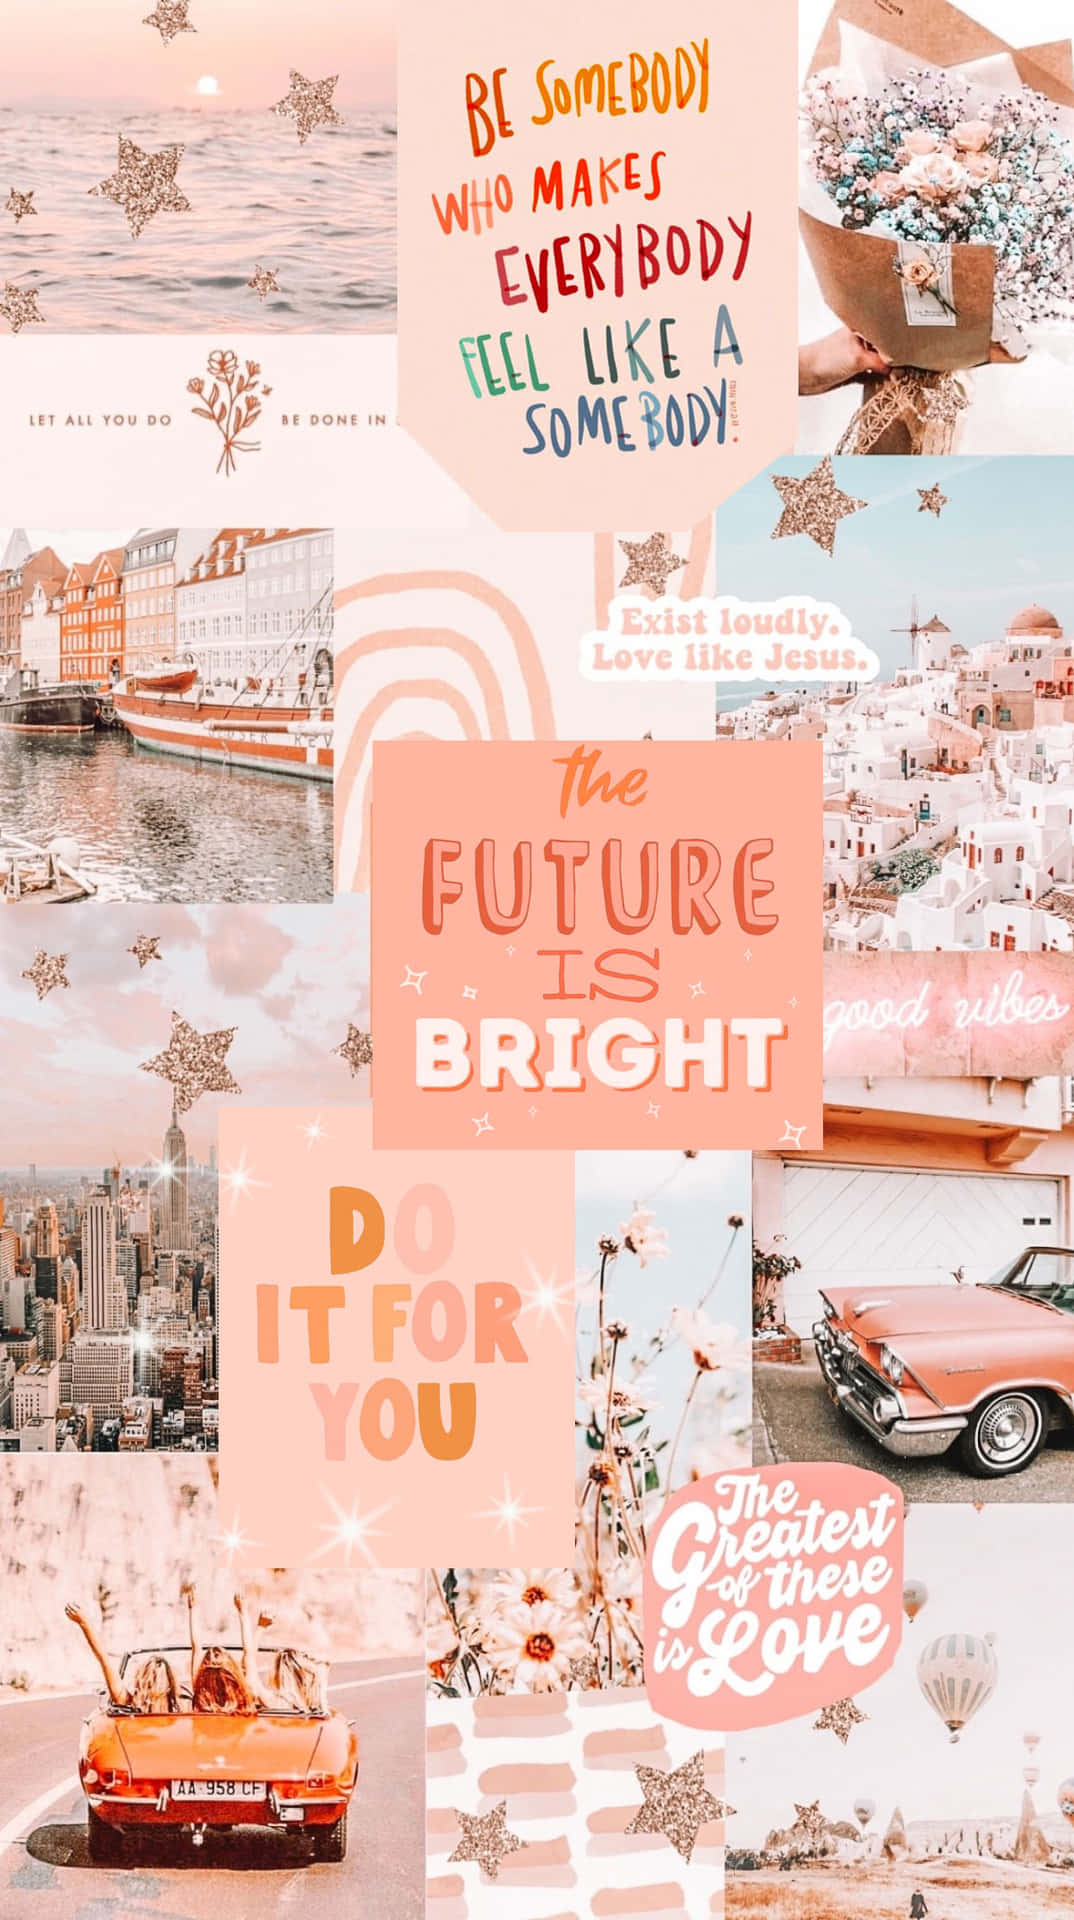 The Future Bright By Sarah Saunders Wallpaper